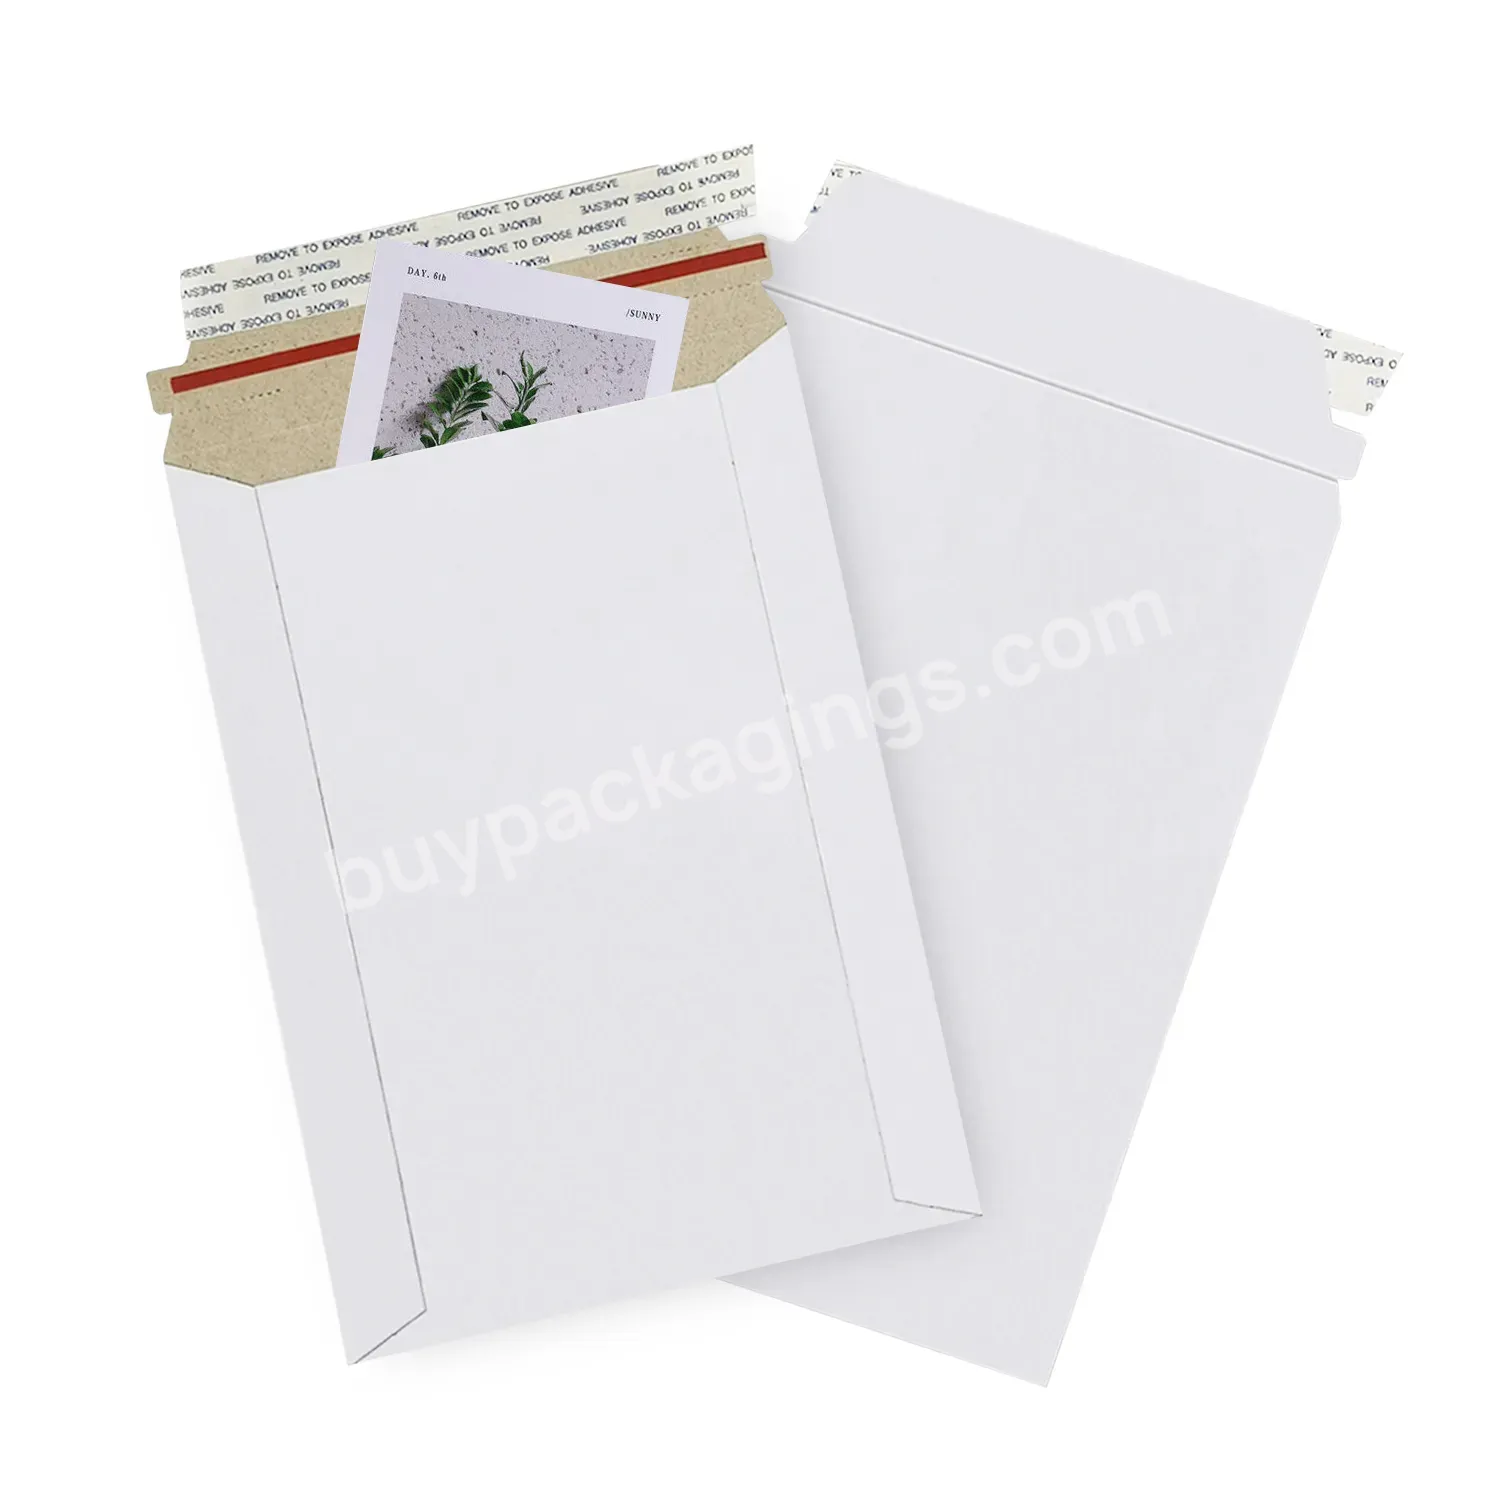 Self Seal Stay Flat Paper Mailing Bags Document Mailer Envelope Cardboard White Rigid Shipping Envelopes For Photos,Documents - Buy Paper Mailing Bags,Document Mailer,Envelope Cardboard.